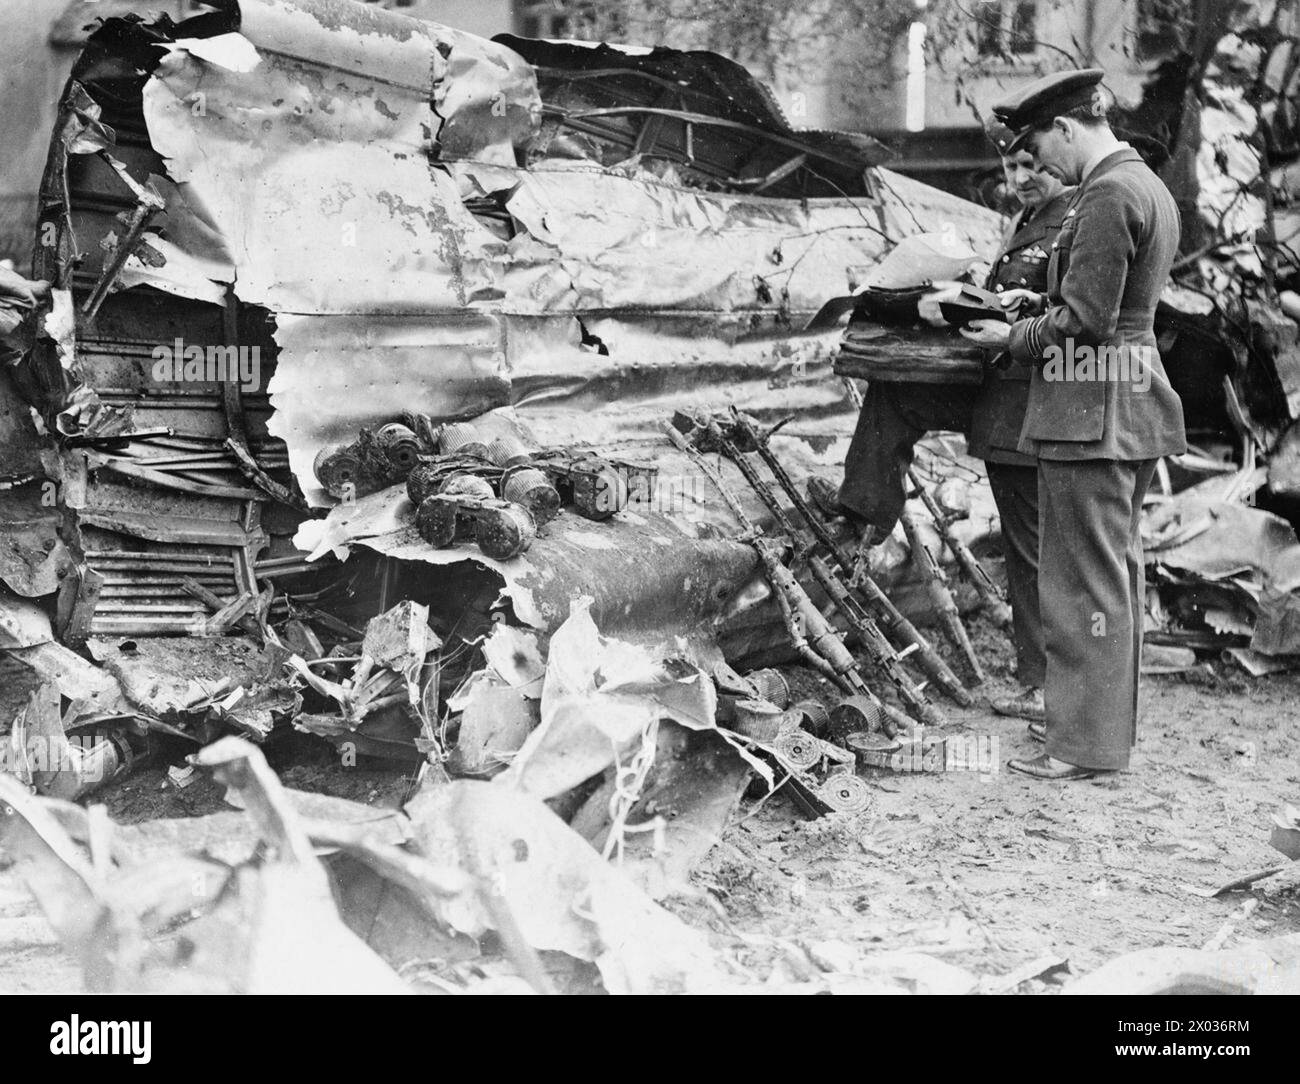 LUFTWAFFE RAIDS OVER BRITAIN - Two senior RAF officers examining the wreckage of a Heinkel He 111 which crashed at Clacton, 1 May 1940. The bomber's defensive 7.92mm MG 17 machine guns and ammunition drums have been collected together Stock Photo